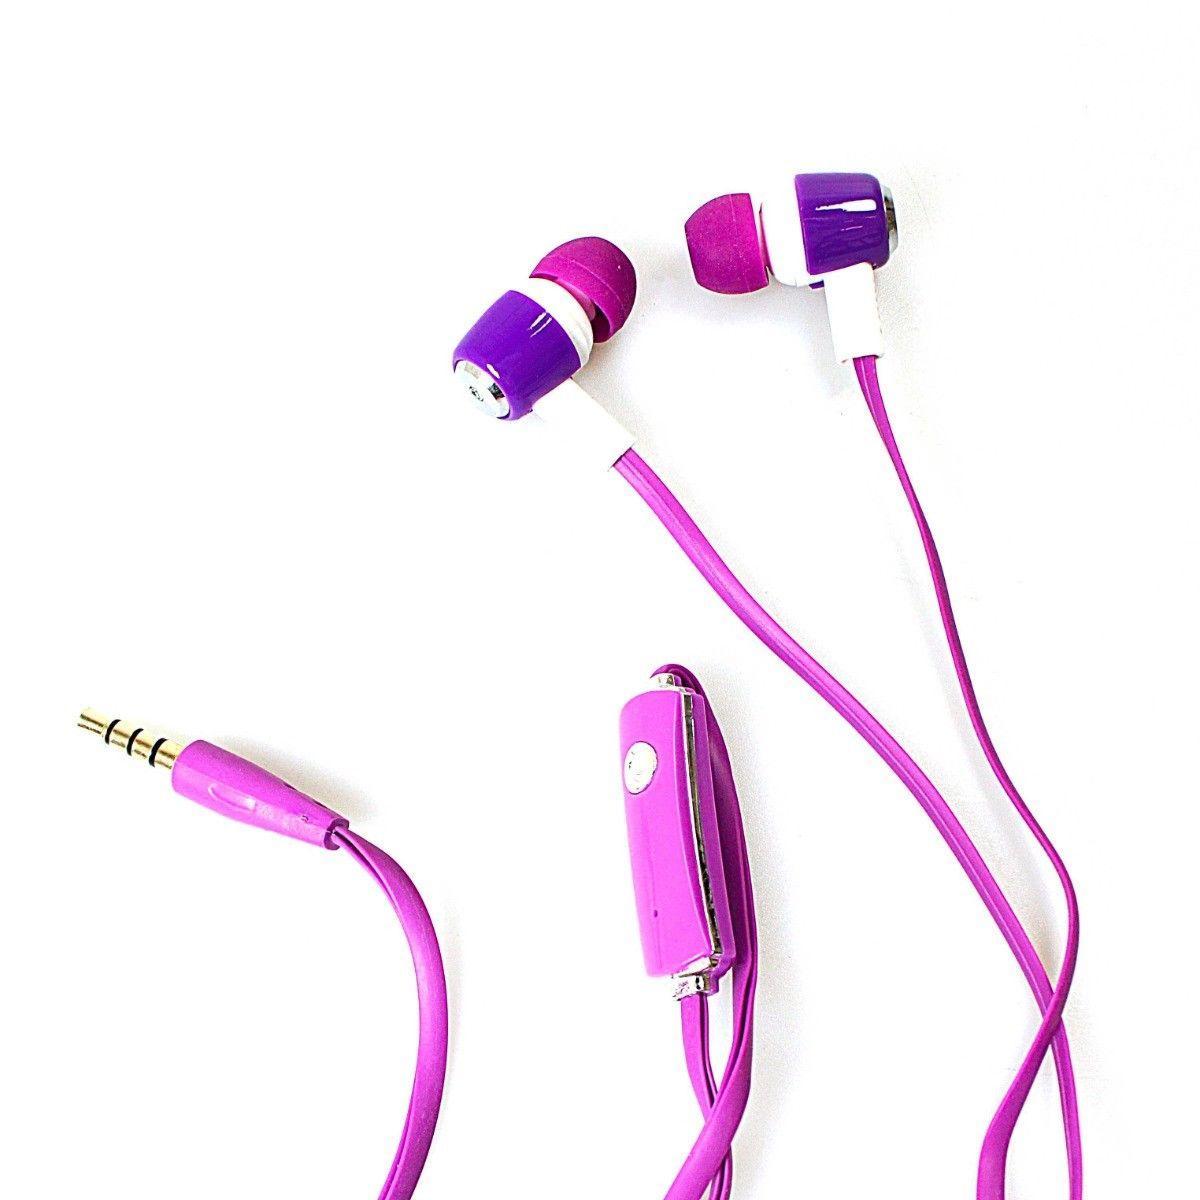 AINY Mix Stereo Earphones In Assorted Colours 3949 (Large Letter Rate)